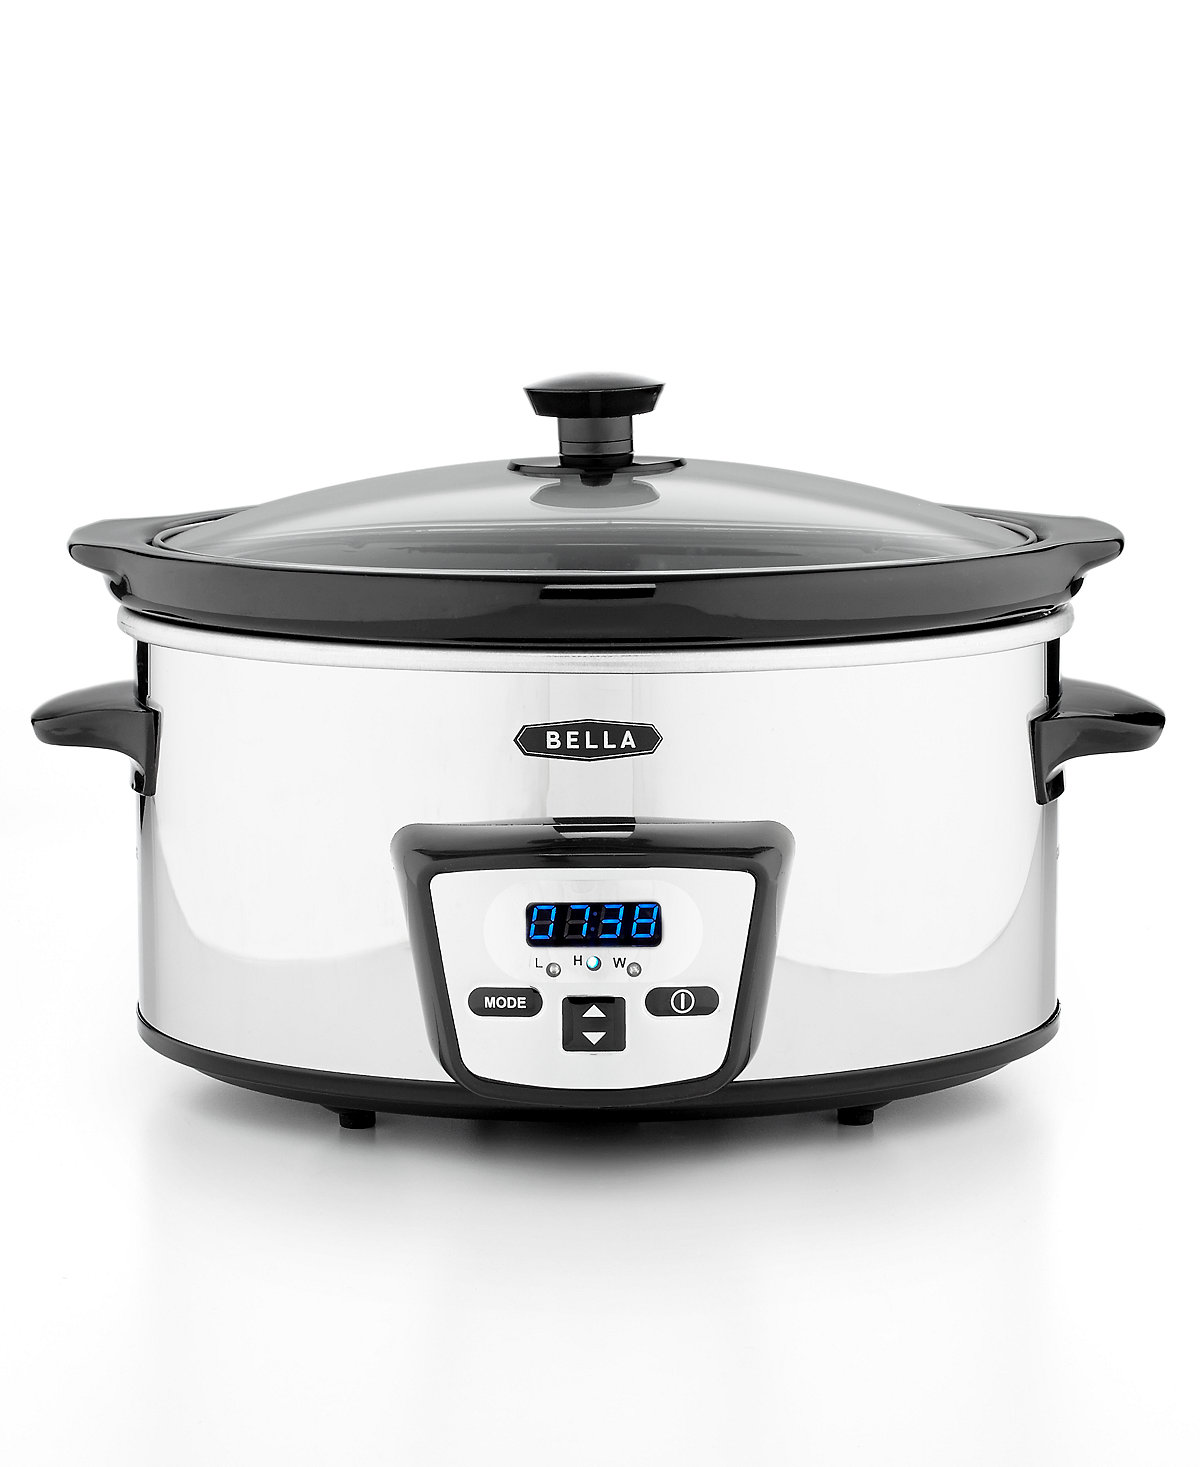 Bella 5 Quart Programmable Polished Stainless Steel Slow Cooker Down to $19.99 + $10 Rebate!